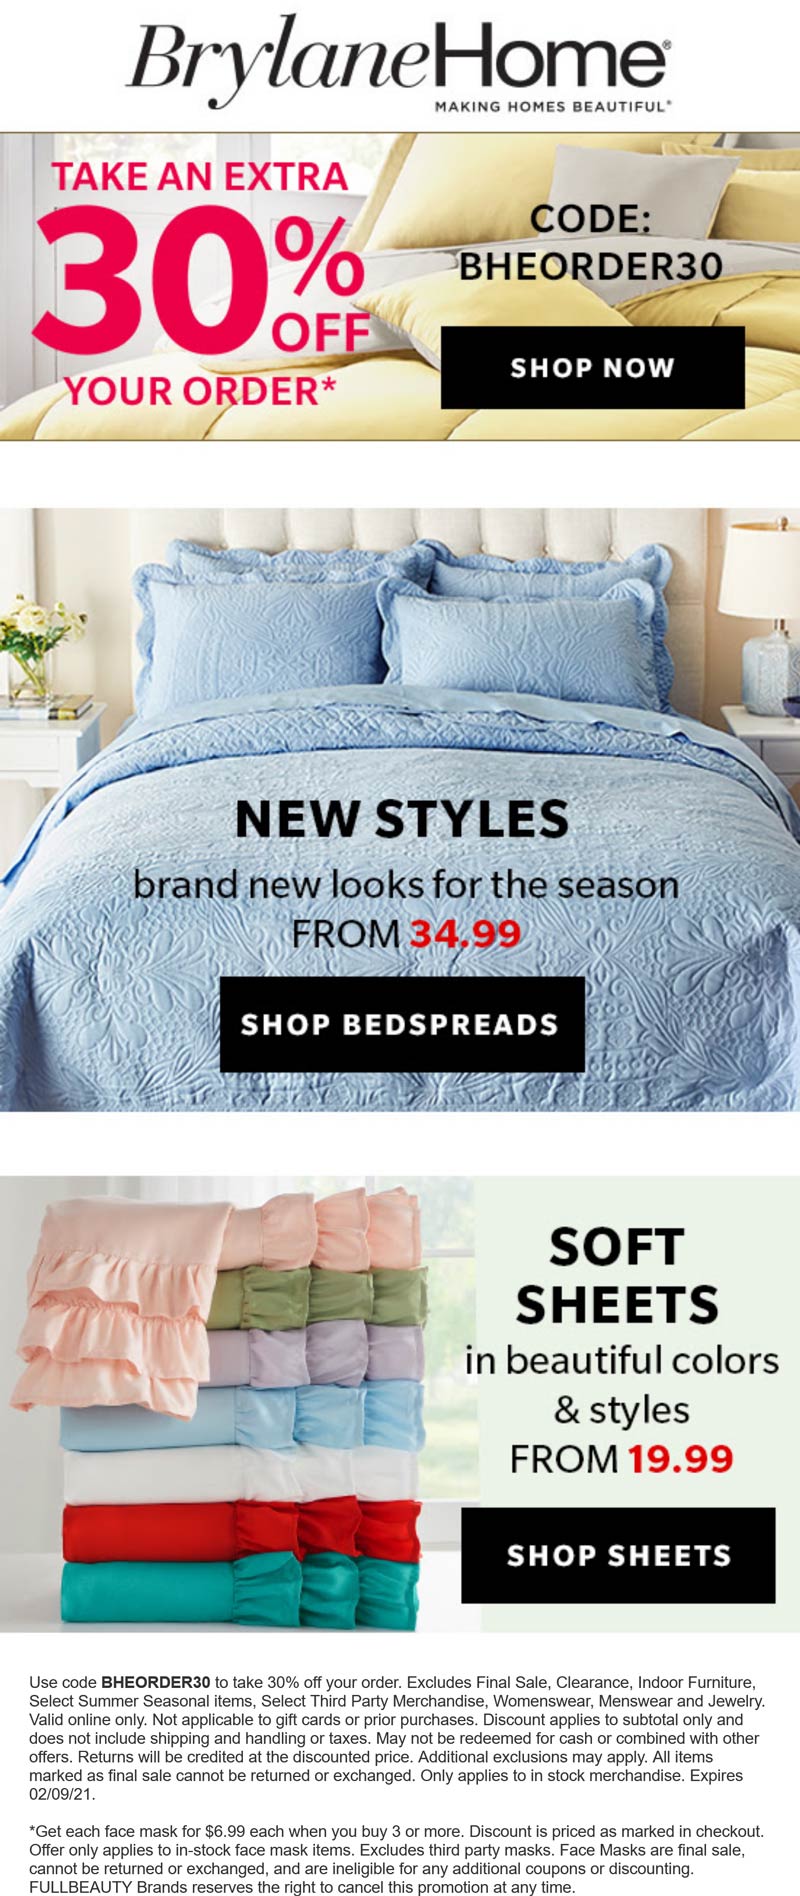 Brylane Home stores Coupon  Extra 30% off at Brylane Home via promo code BHEORDER30 #brylanehome 